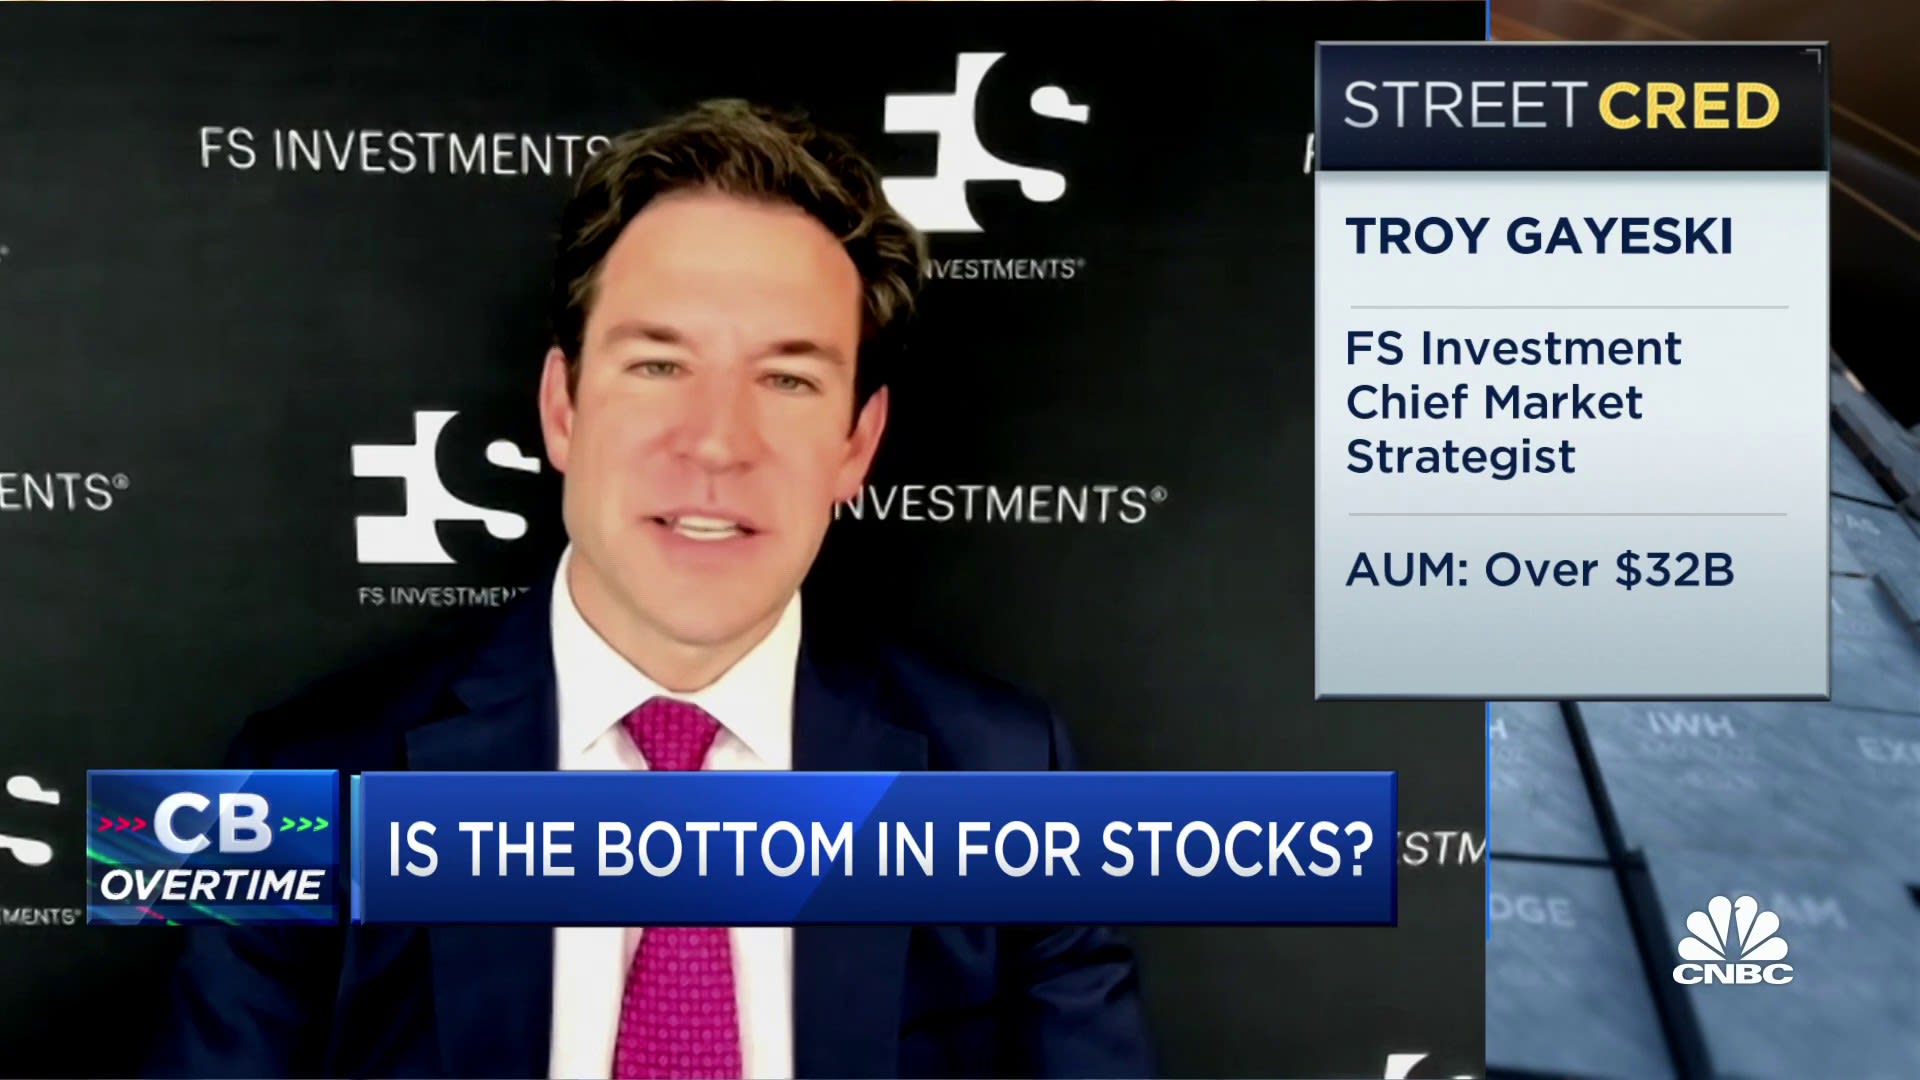 This is a classic bear market rally, says FS Investment's Gayeski